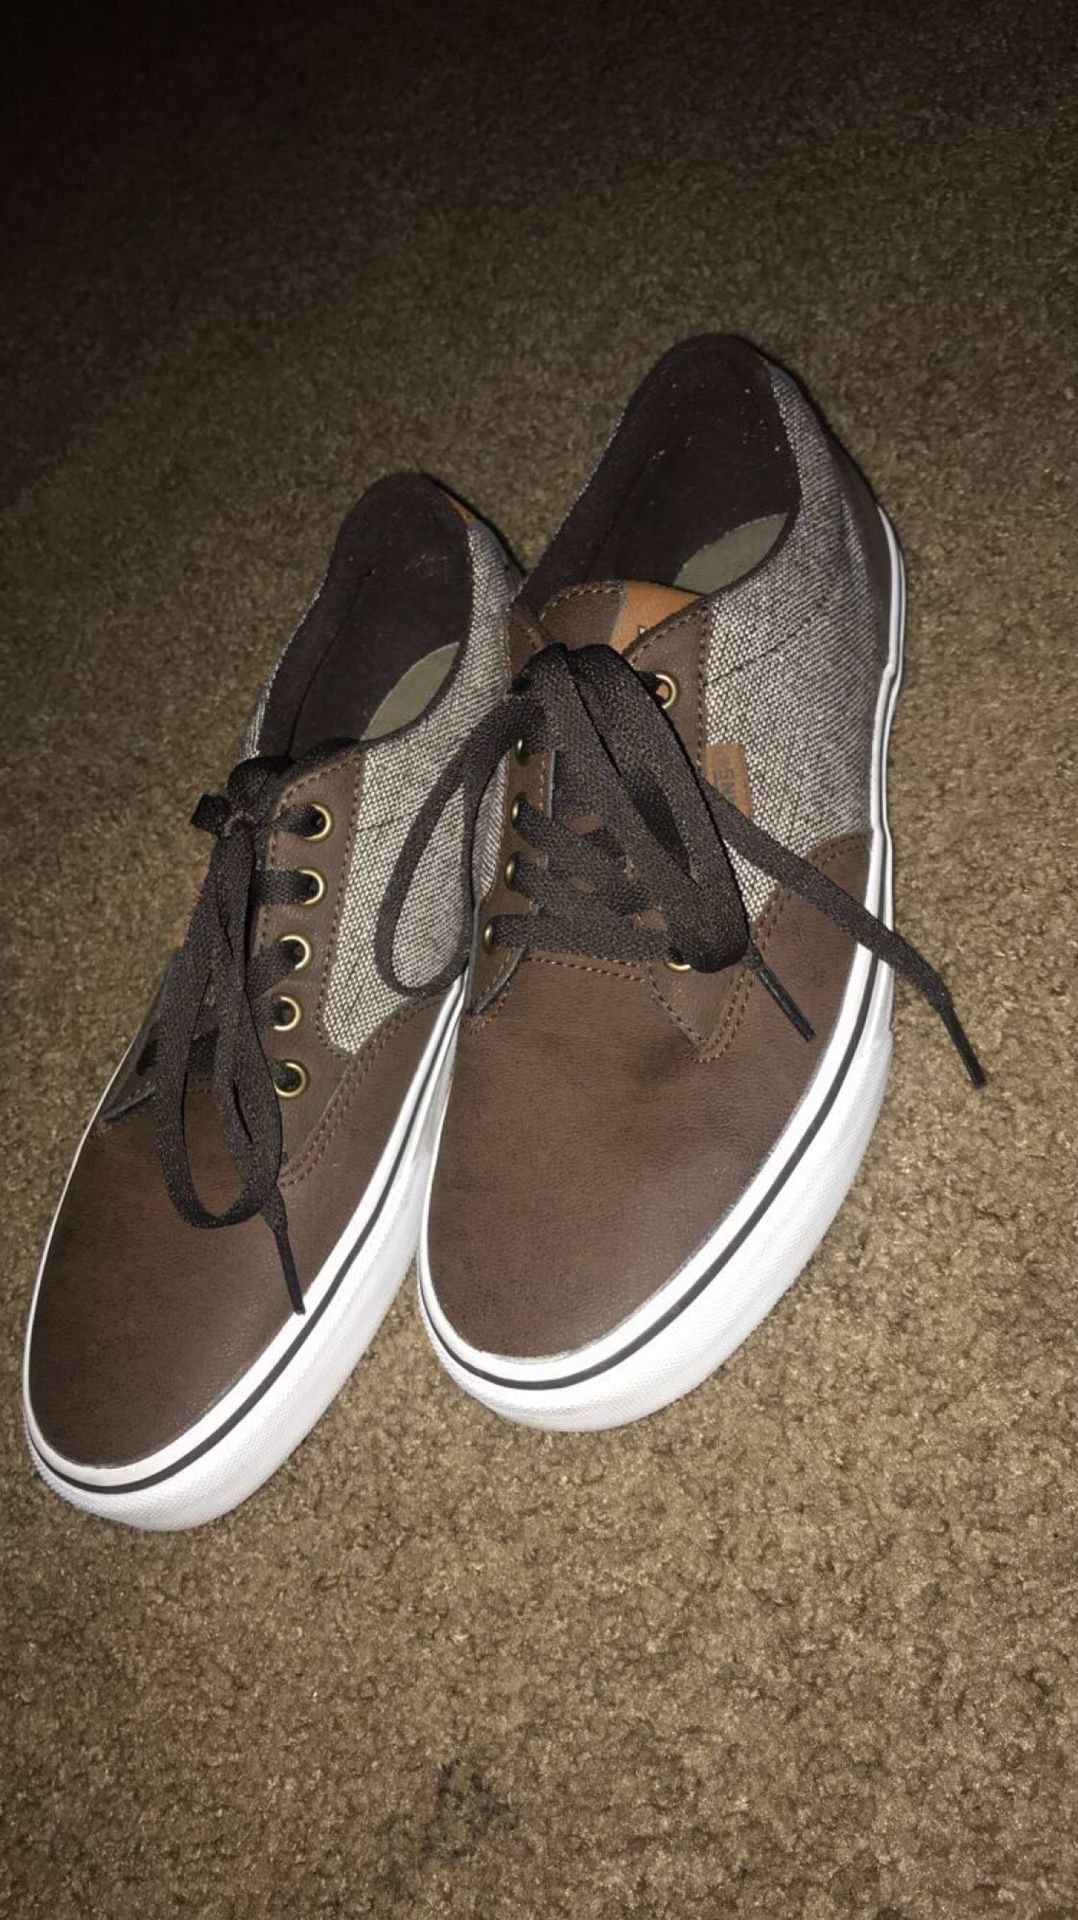 *SELLING FOR A FRIEND* Brown leather Vans